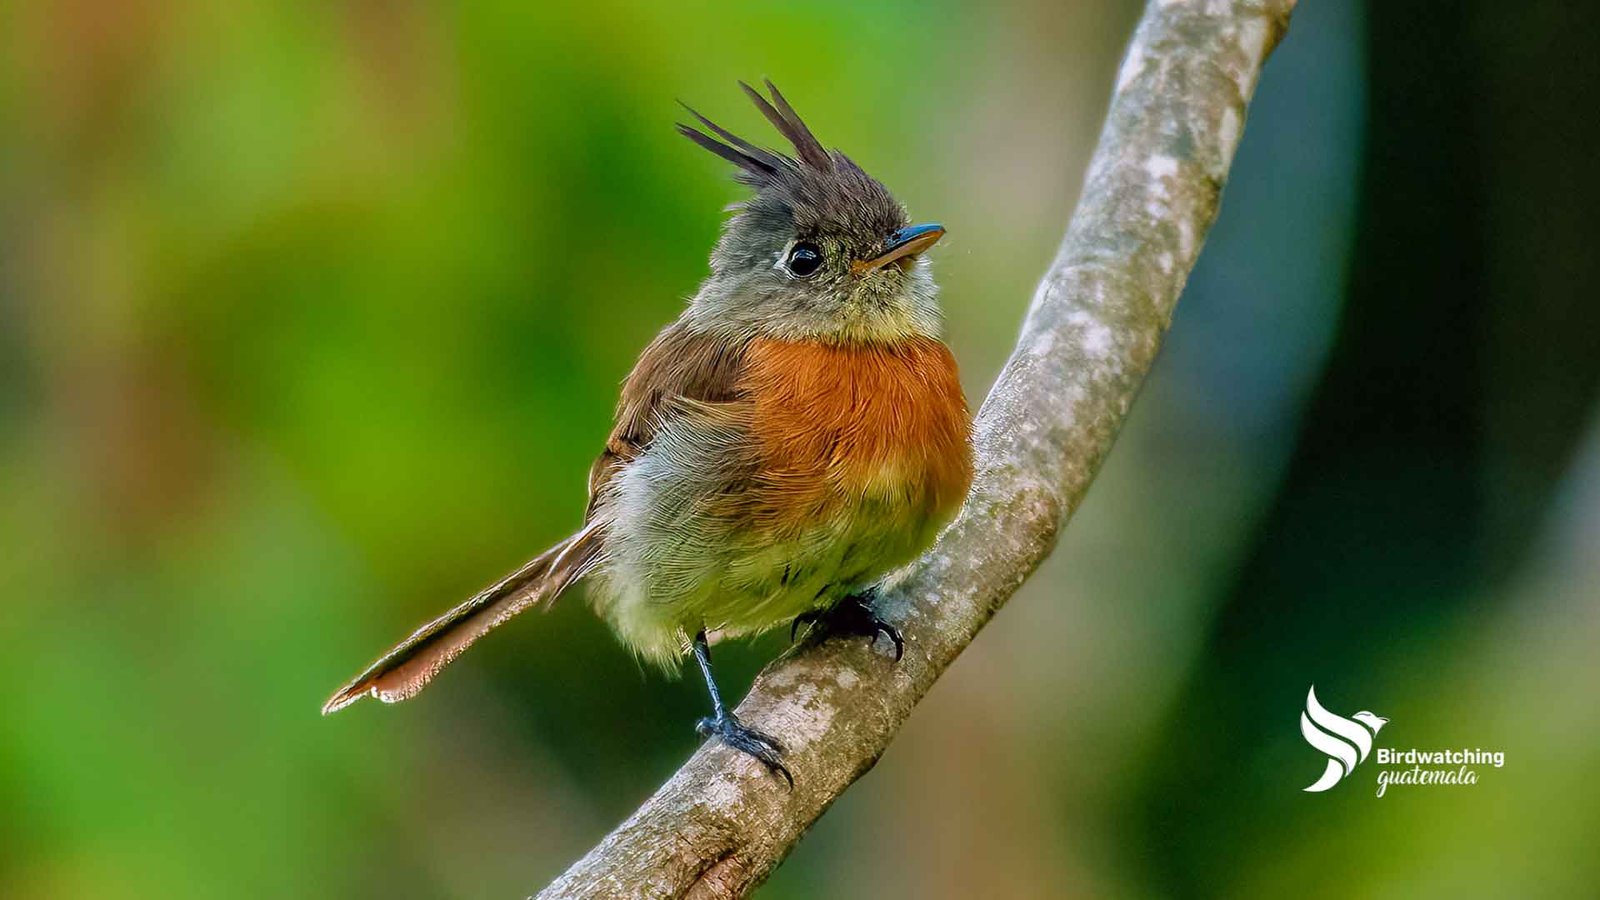 Close-up of a Belted Flycatcher perched on a branch in its natural habitat, illustrating birdwatching in Guatemala. 